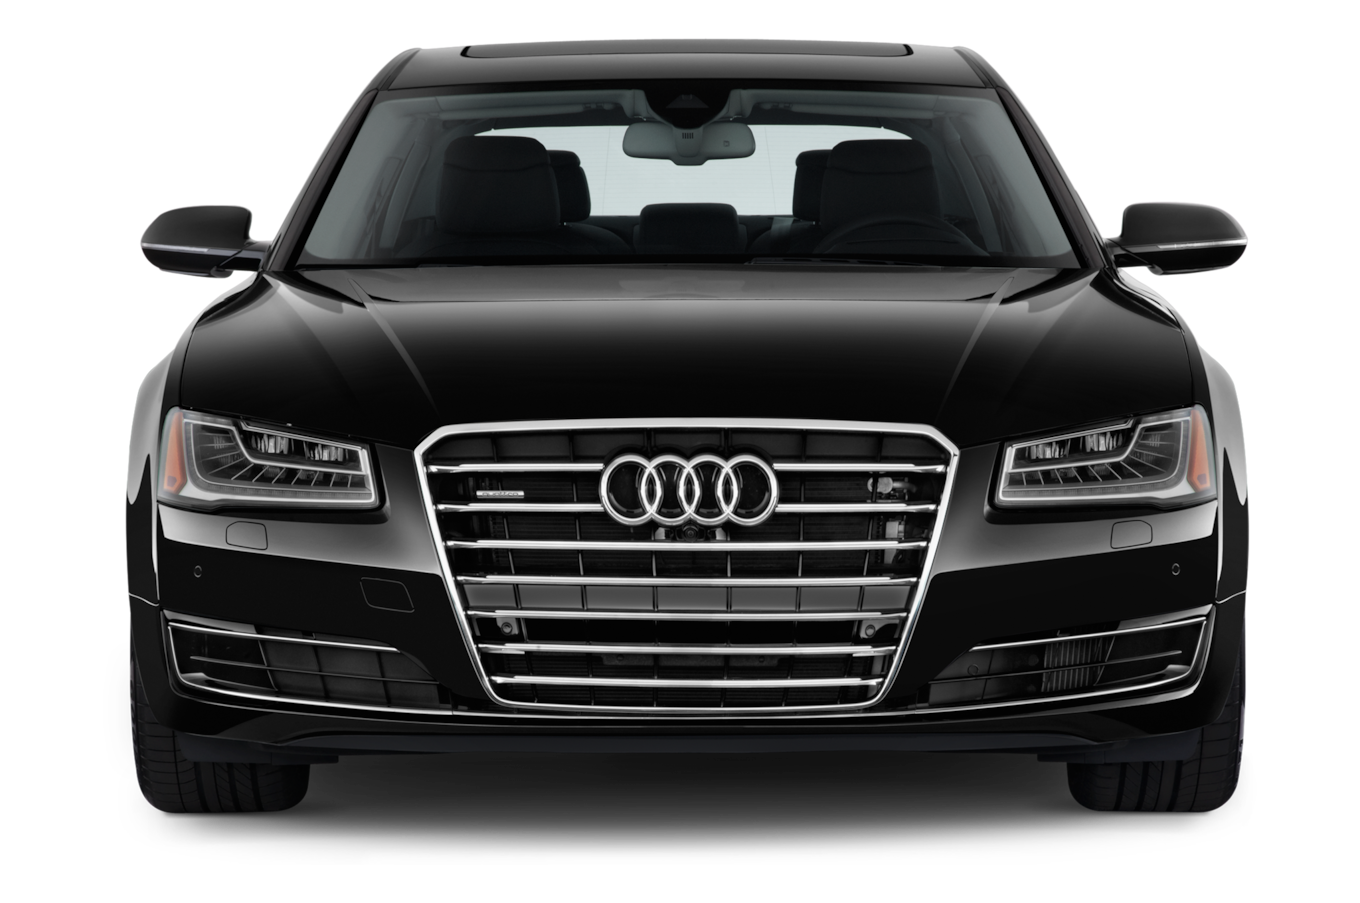 <span style="font-weight: bold;">AUDI A8 LONG</span><br>